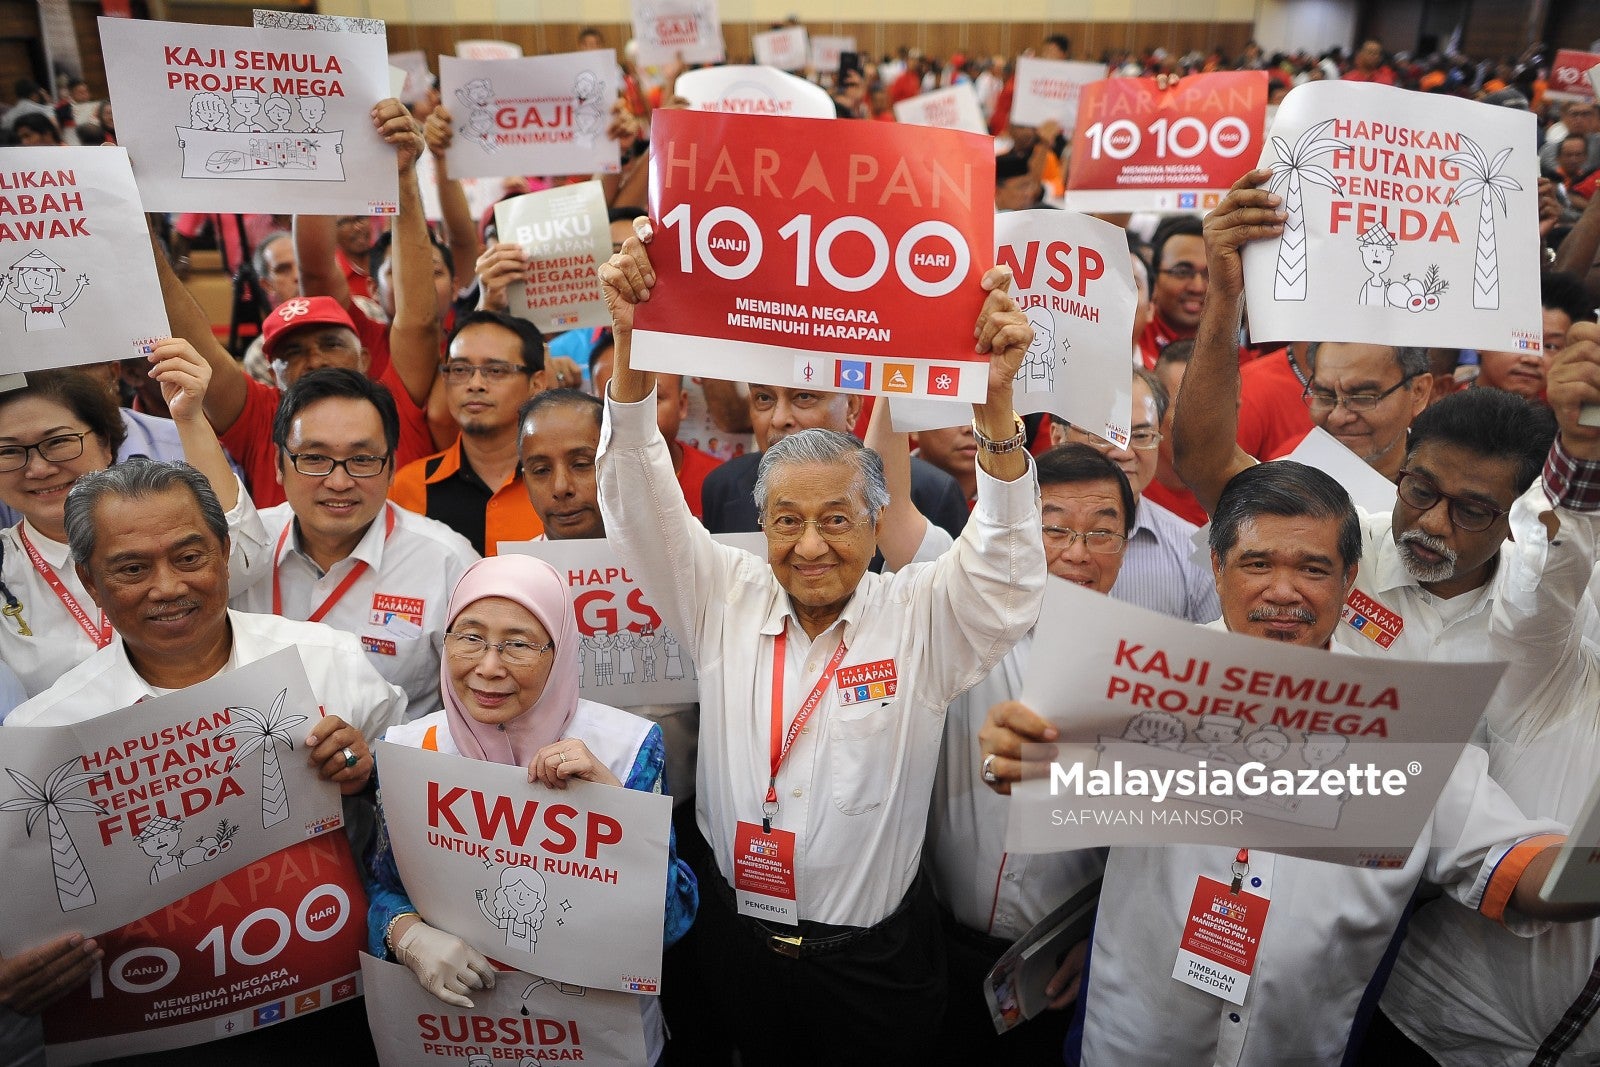 This Website Is Tracking All Of Pakatan Harapan's Campaign Promises - WORLD OF BUZZ 2